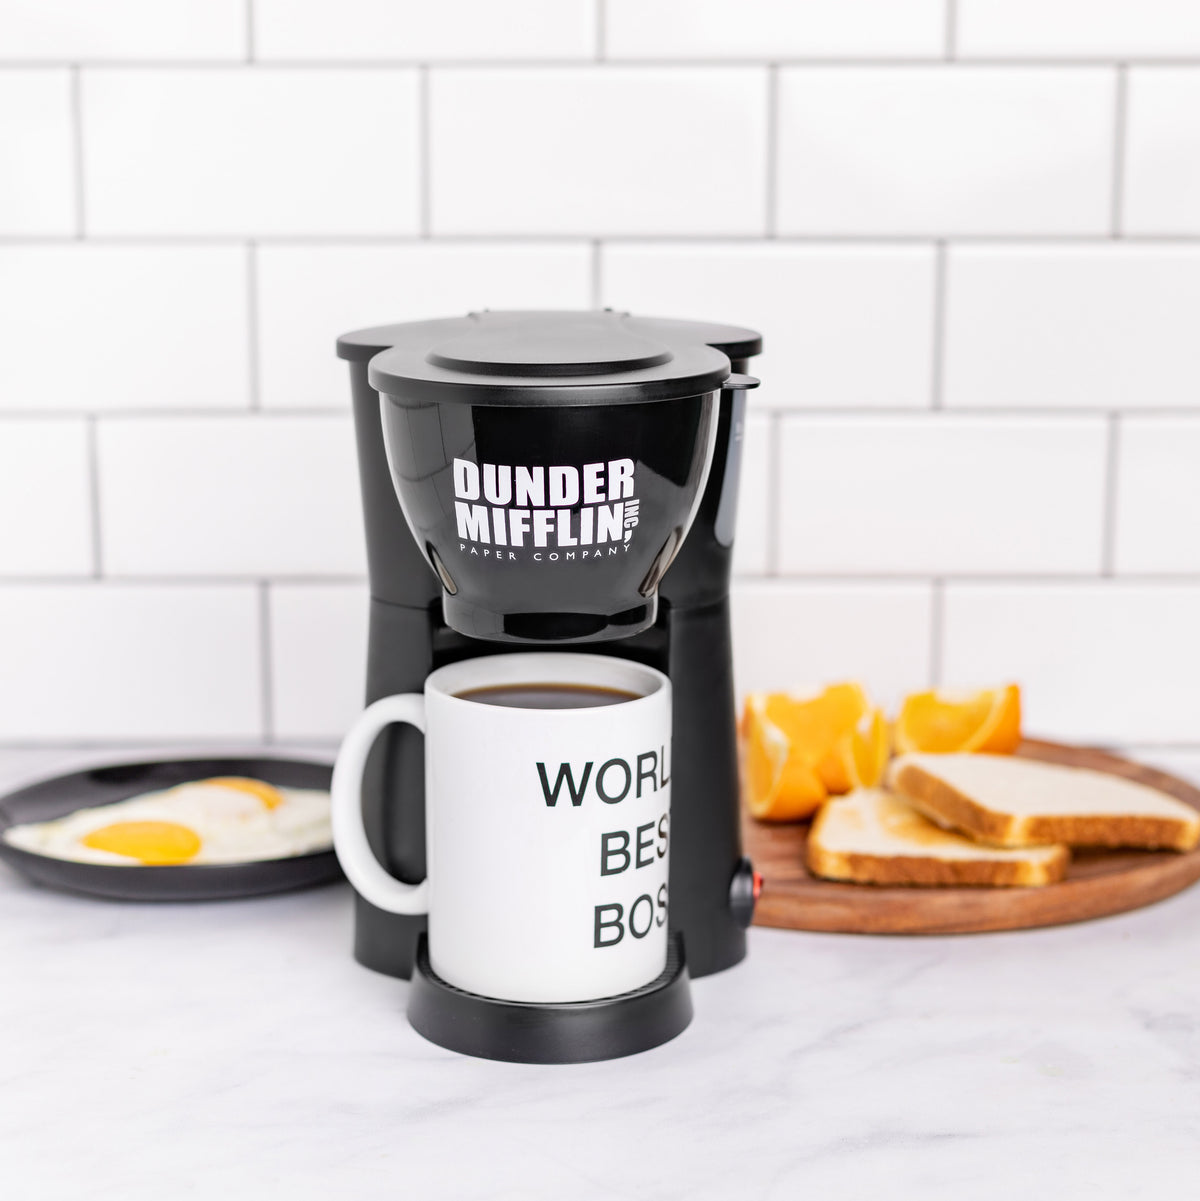 The Office Coffee Maker Set - Uncanny Brands